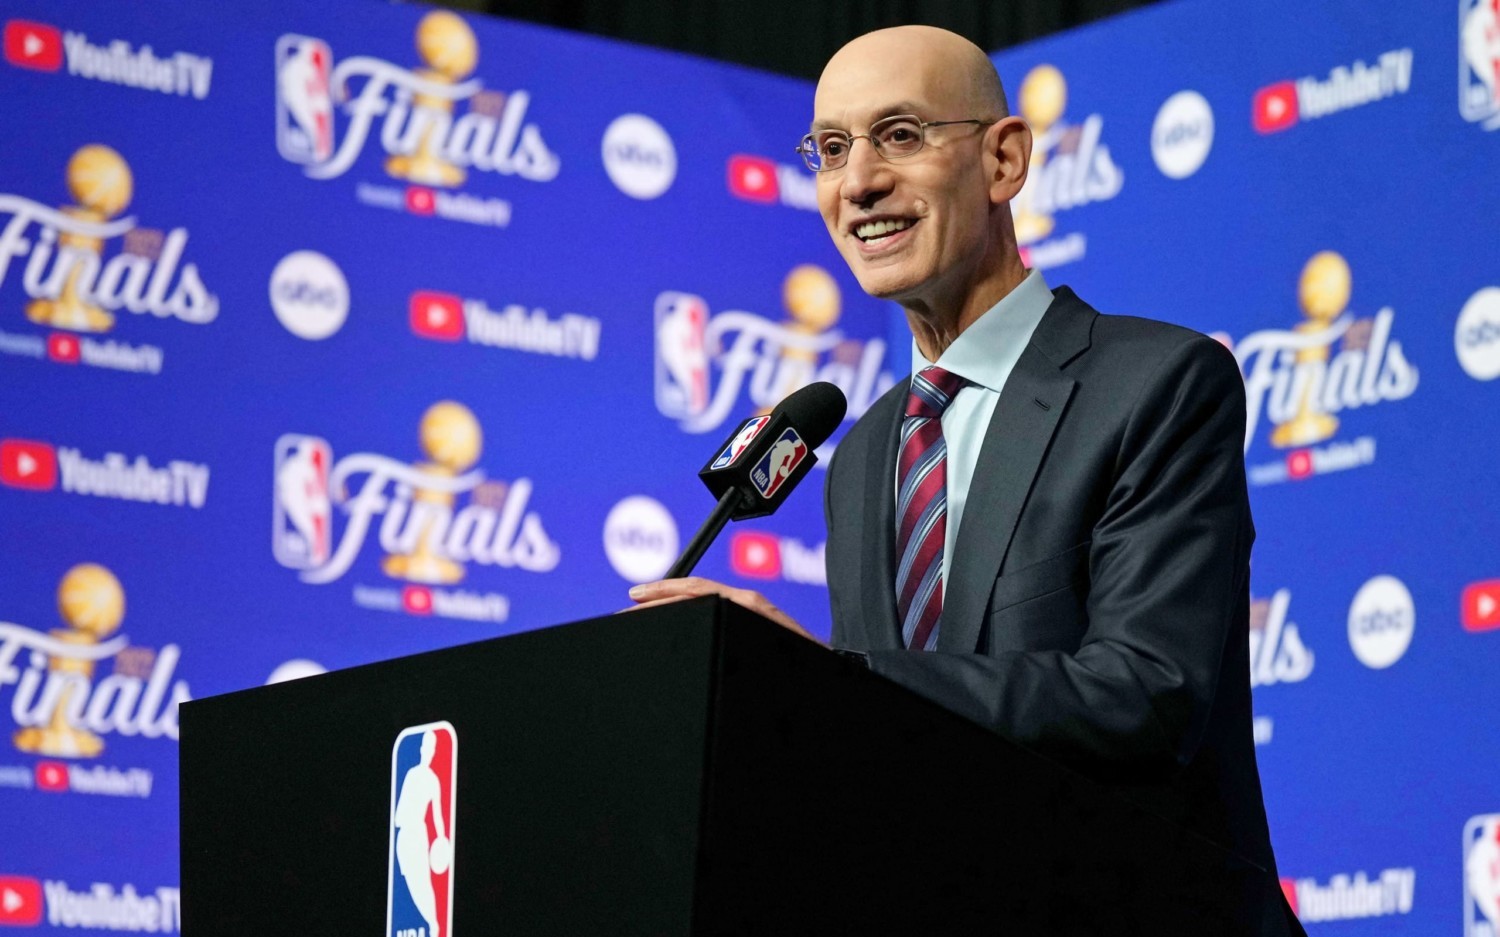 Would The NBA Embrace Streaming for $100B?